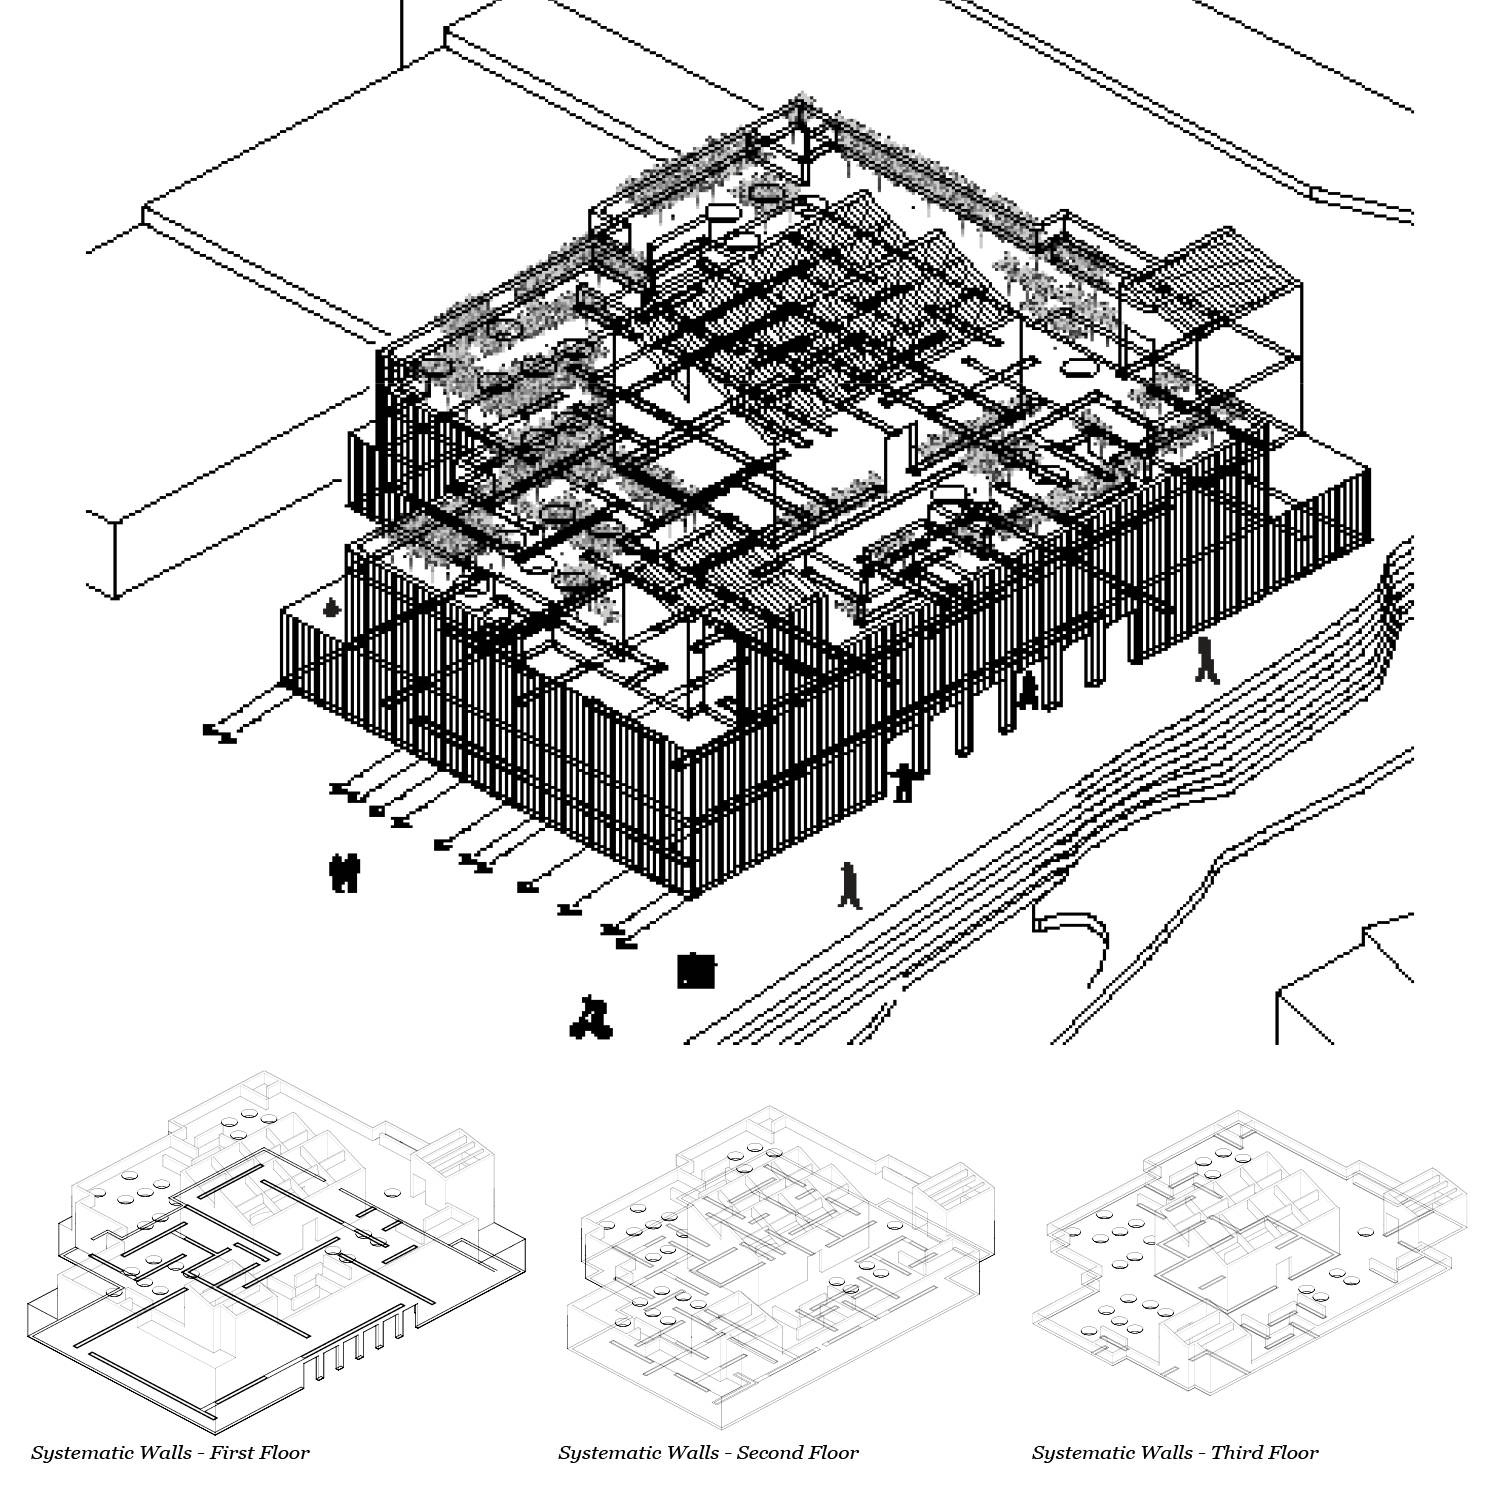 Isometric CAD drawing.